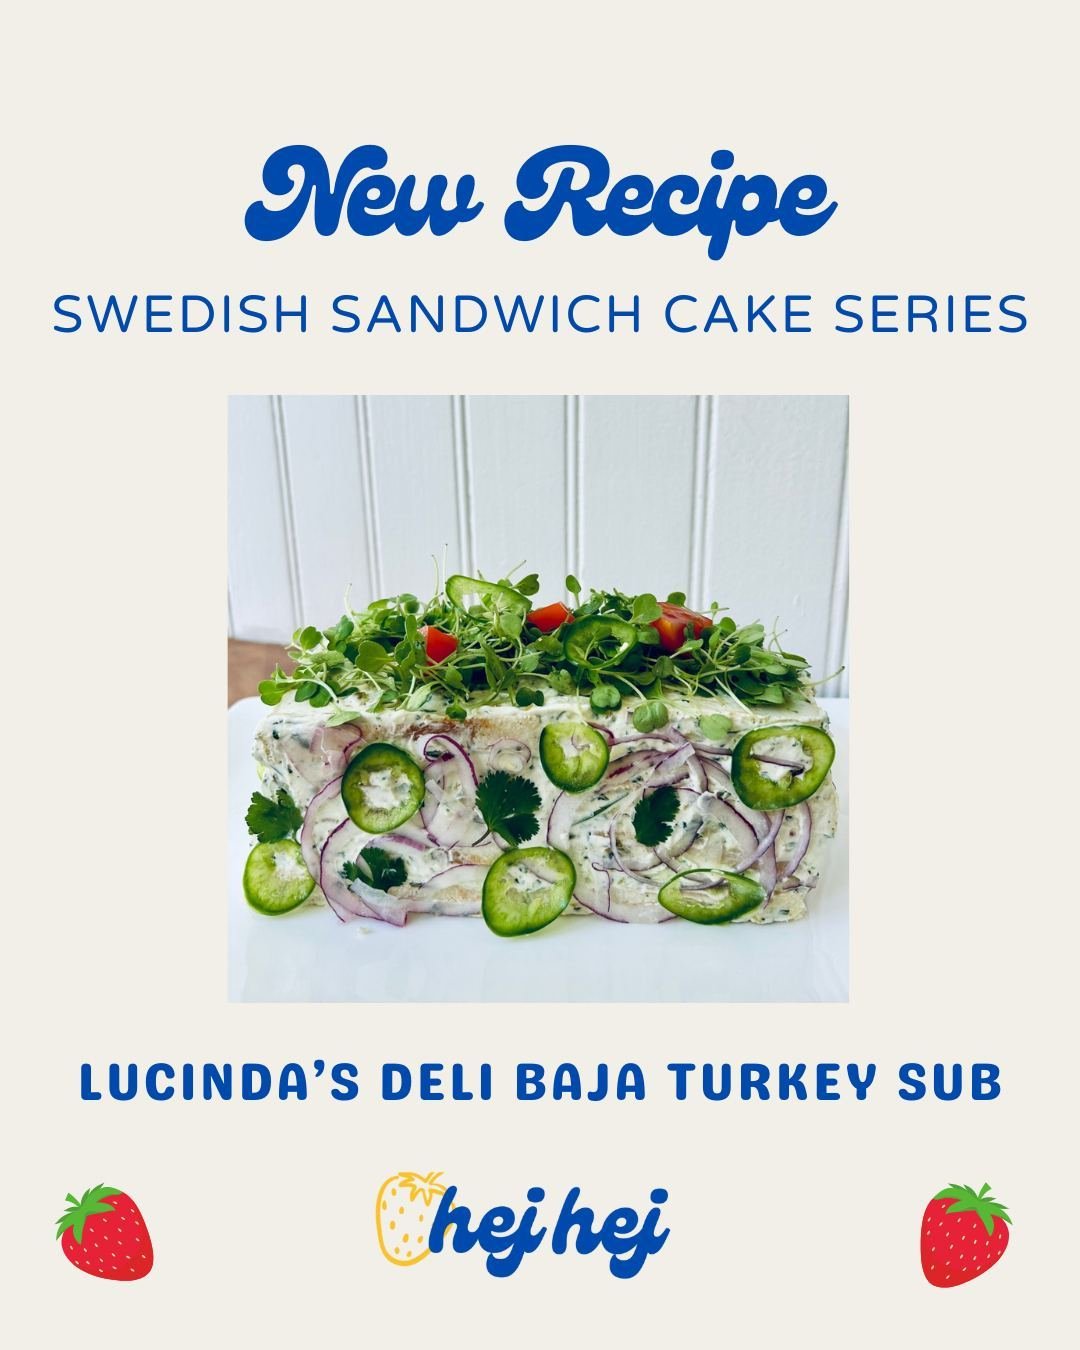 Sm&ouml;rg&aring;st&aring;rta! &quot;S'mure-gahs-torta&quot; - say it with me now! ⁠
⁠
Welcome back to week two of my sm&ouml;rg&aring;st&aring;rta or Swedish sandwich cake series. I've decided you simply cannot have a bad day if you make one of thes